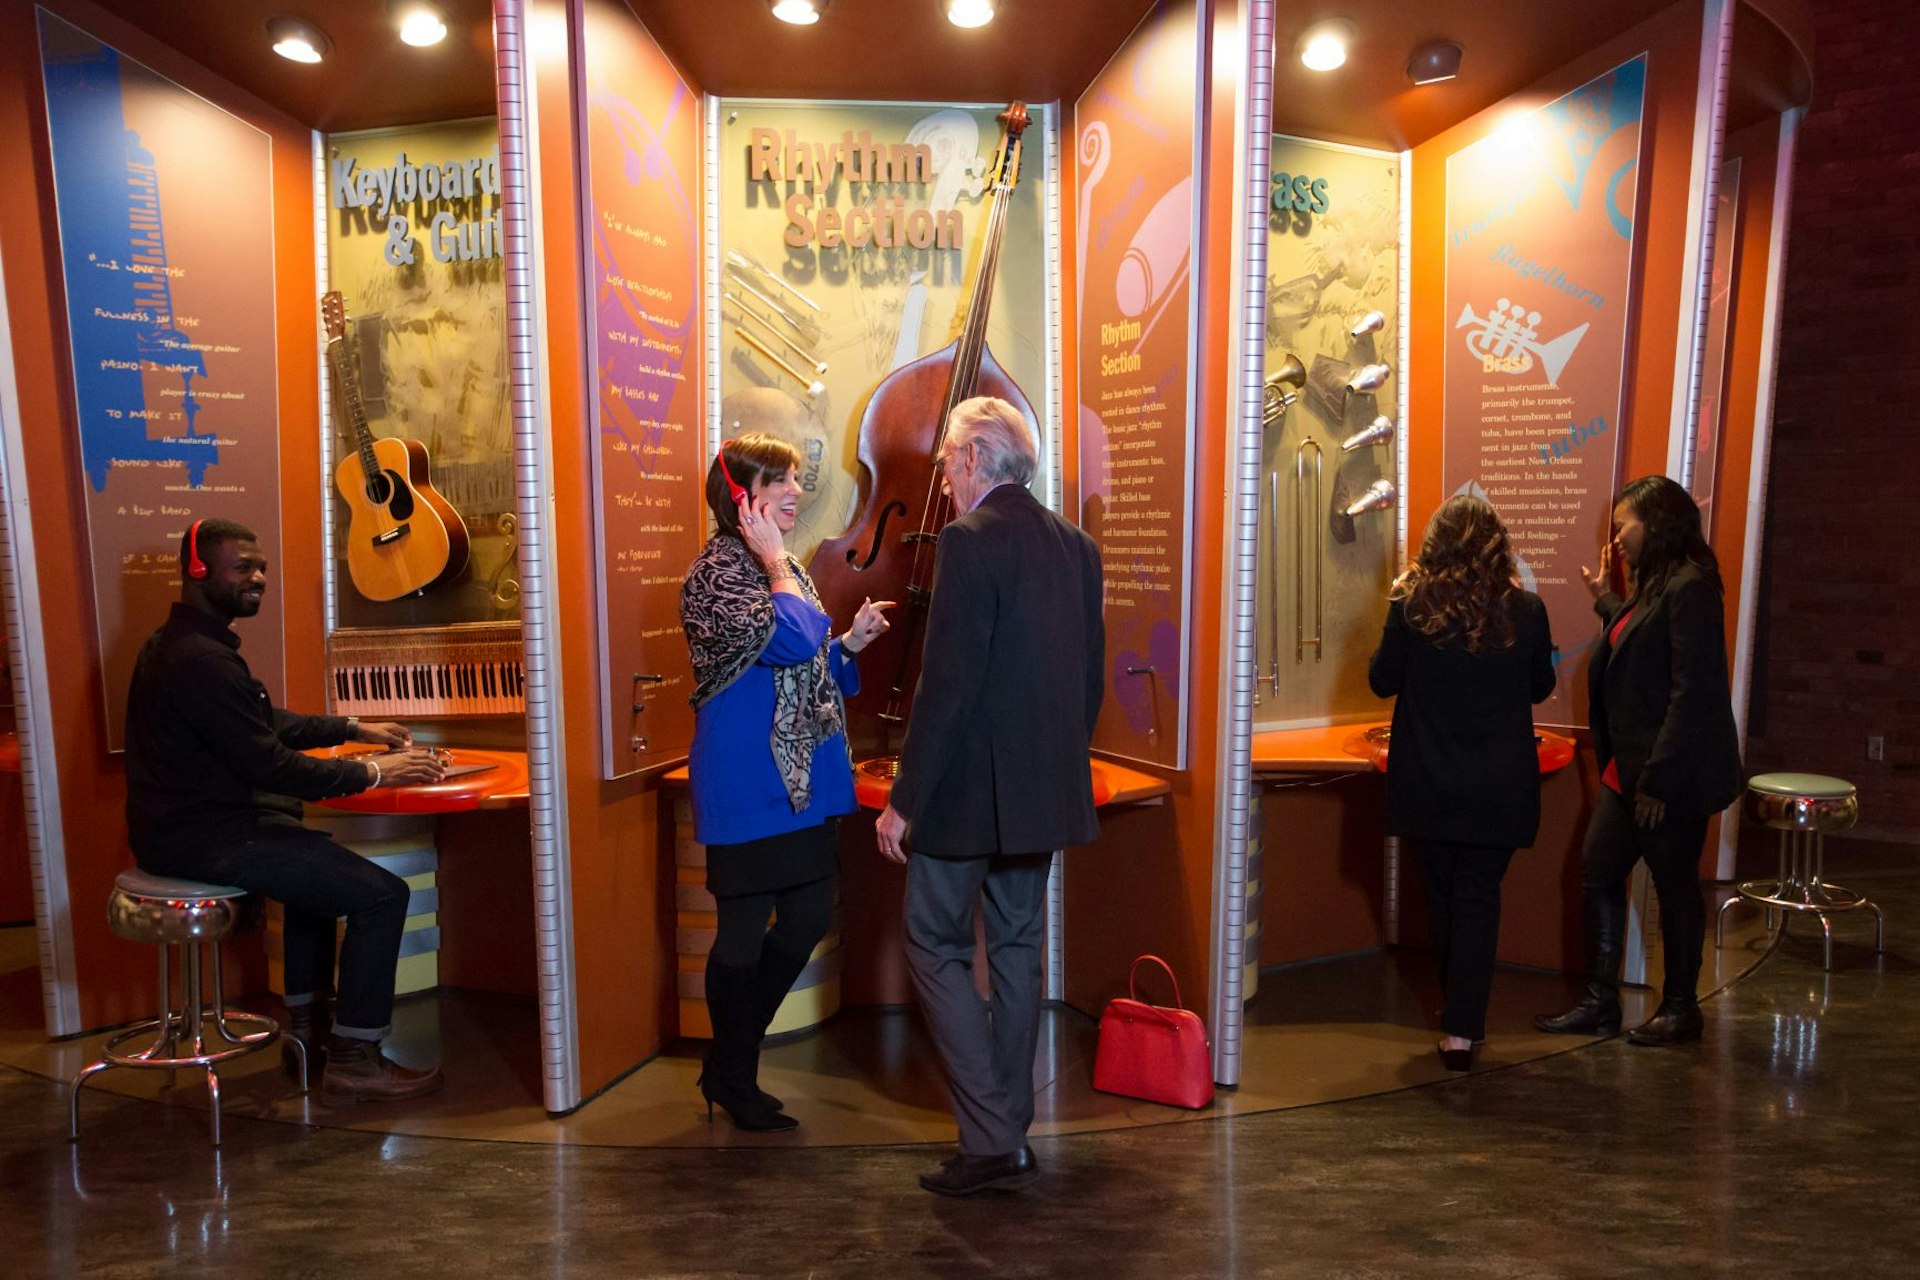 People stand listening to headphones inside the American Jazz Museum. USA museums for music lovers